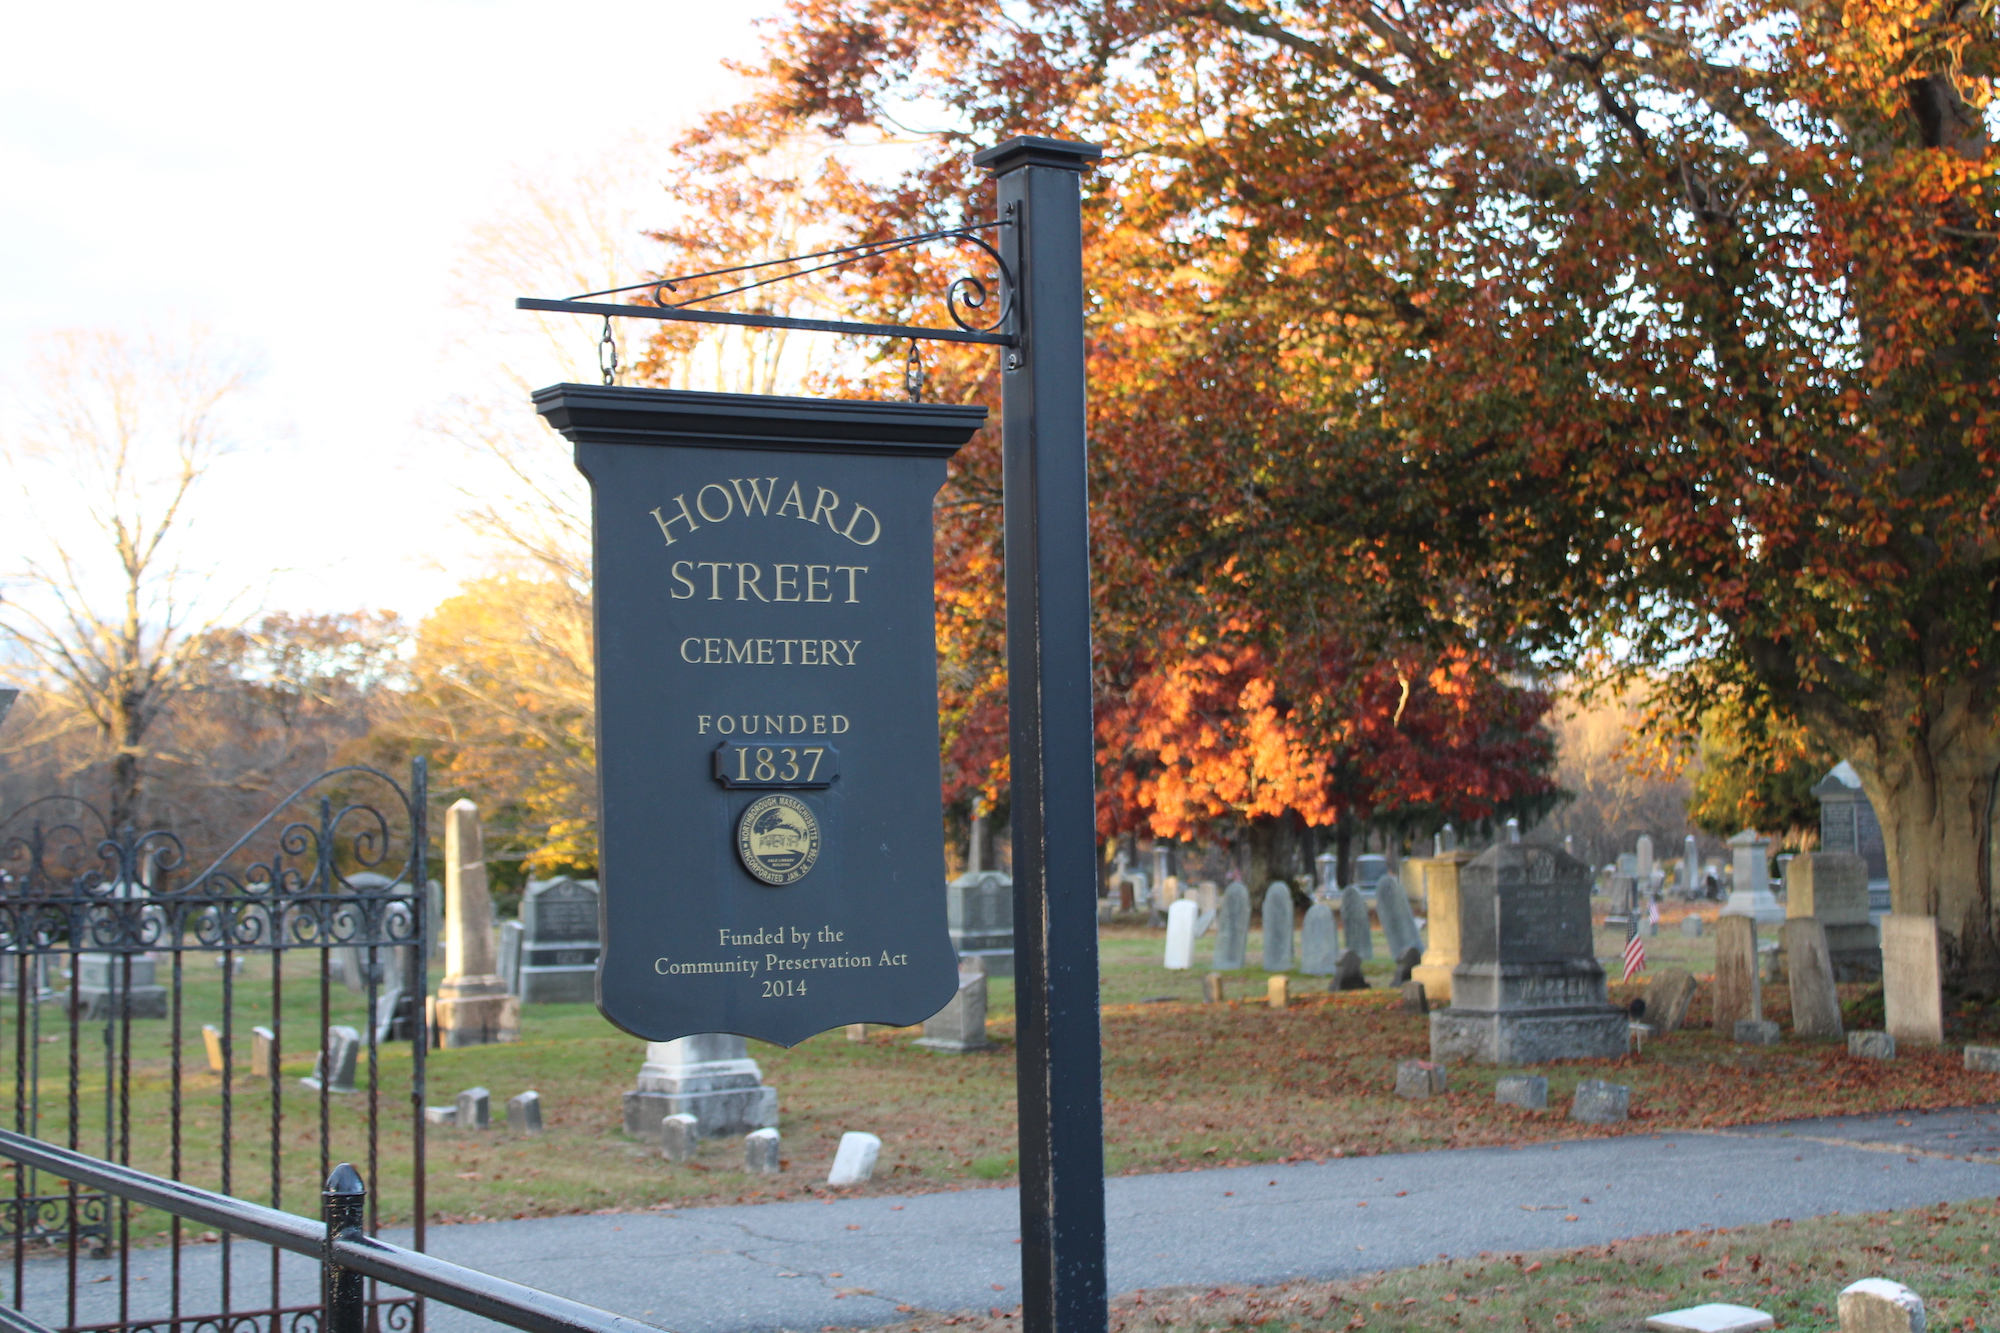 Northborough’s Howard Street Cemetery is the eternal home for many prominent residents